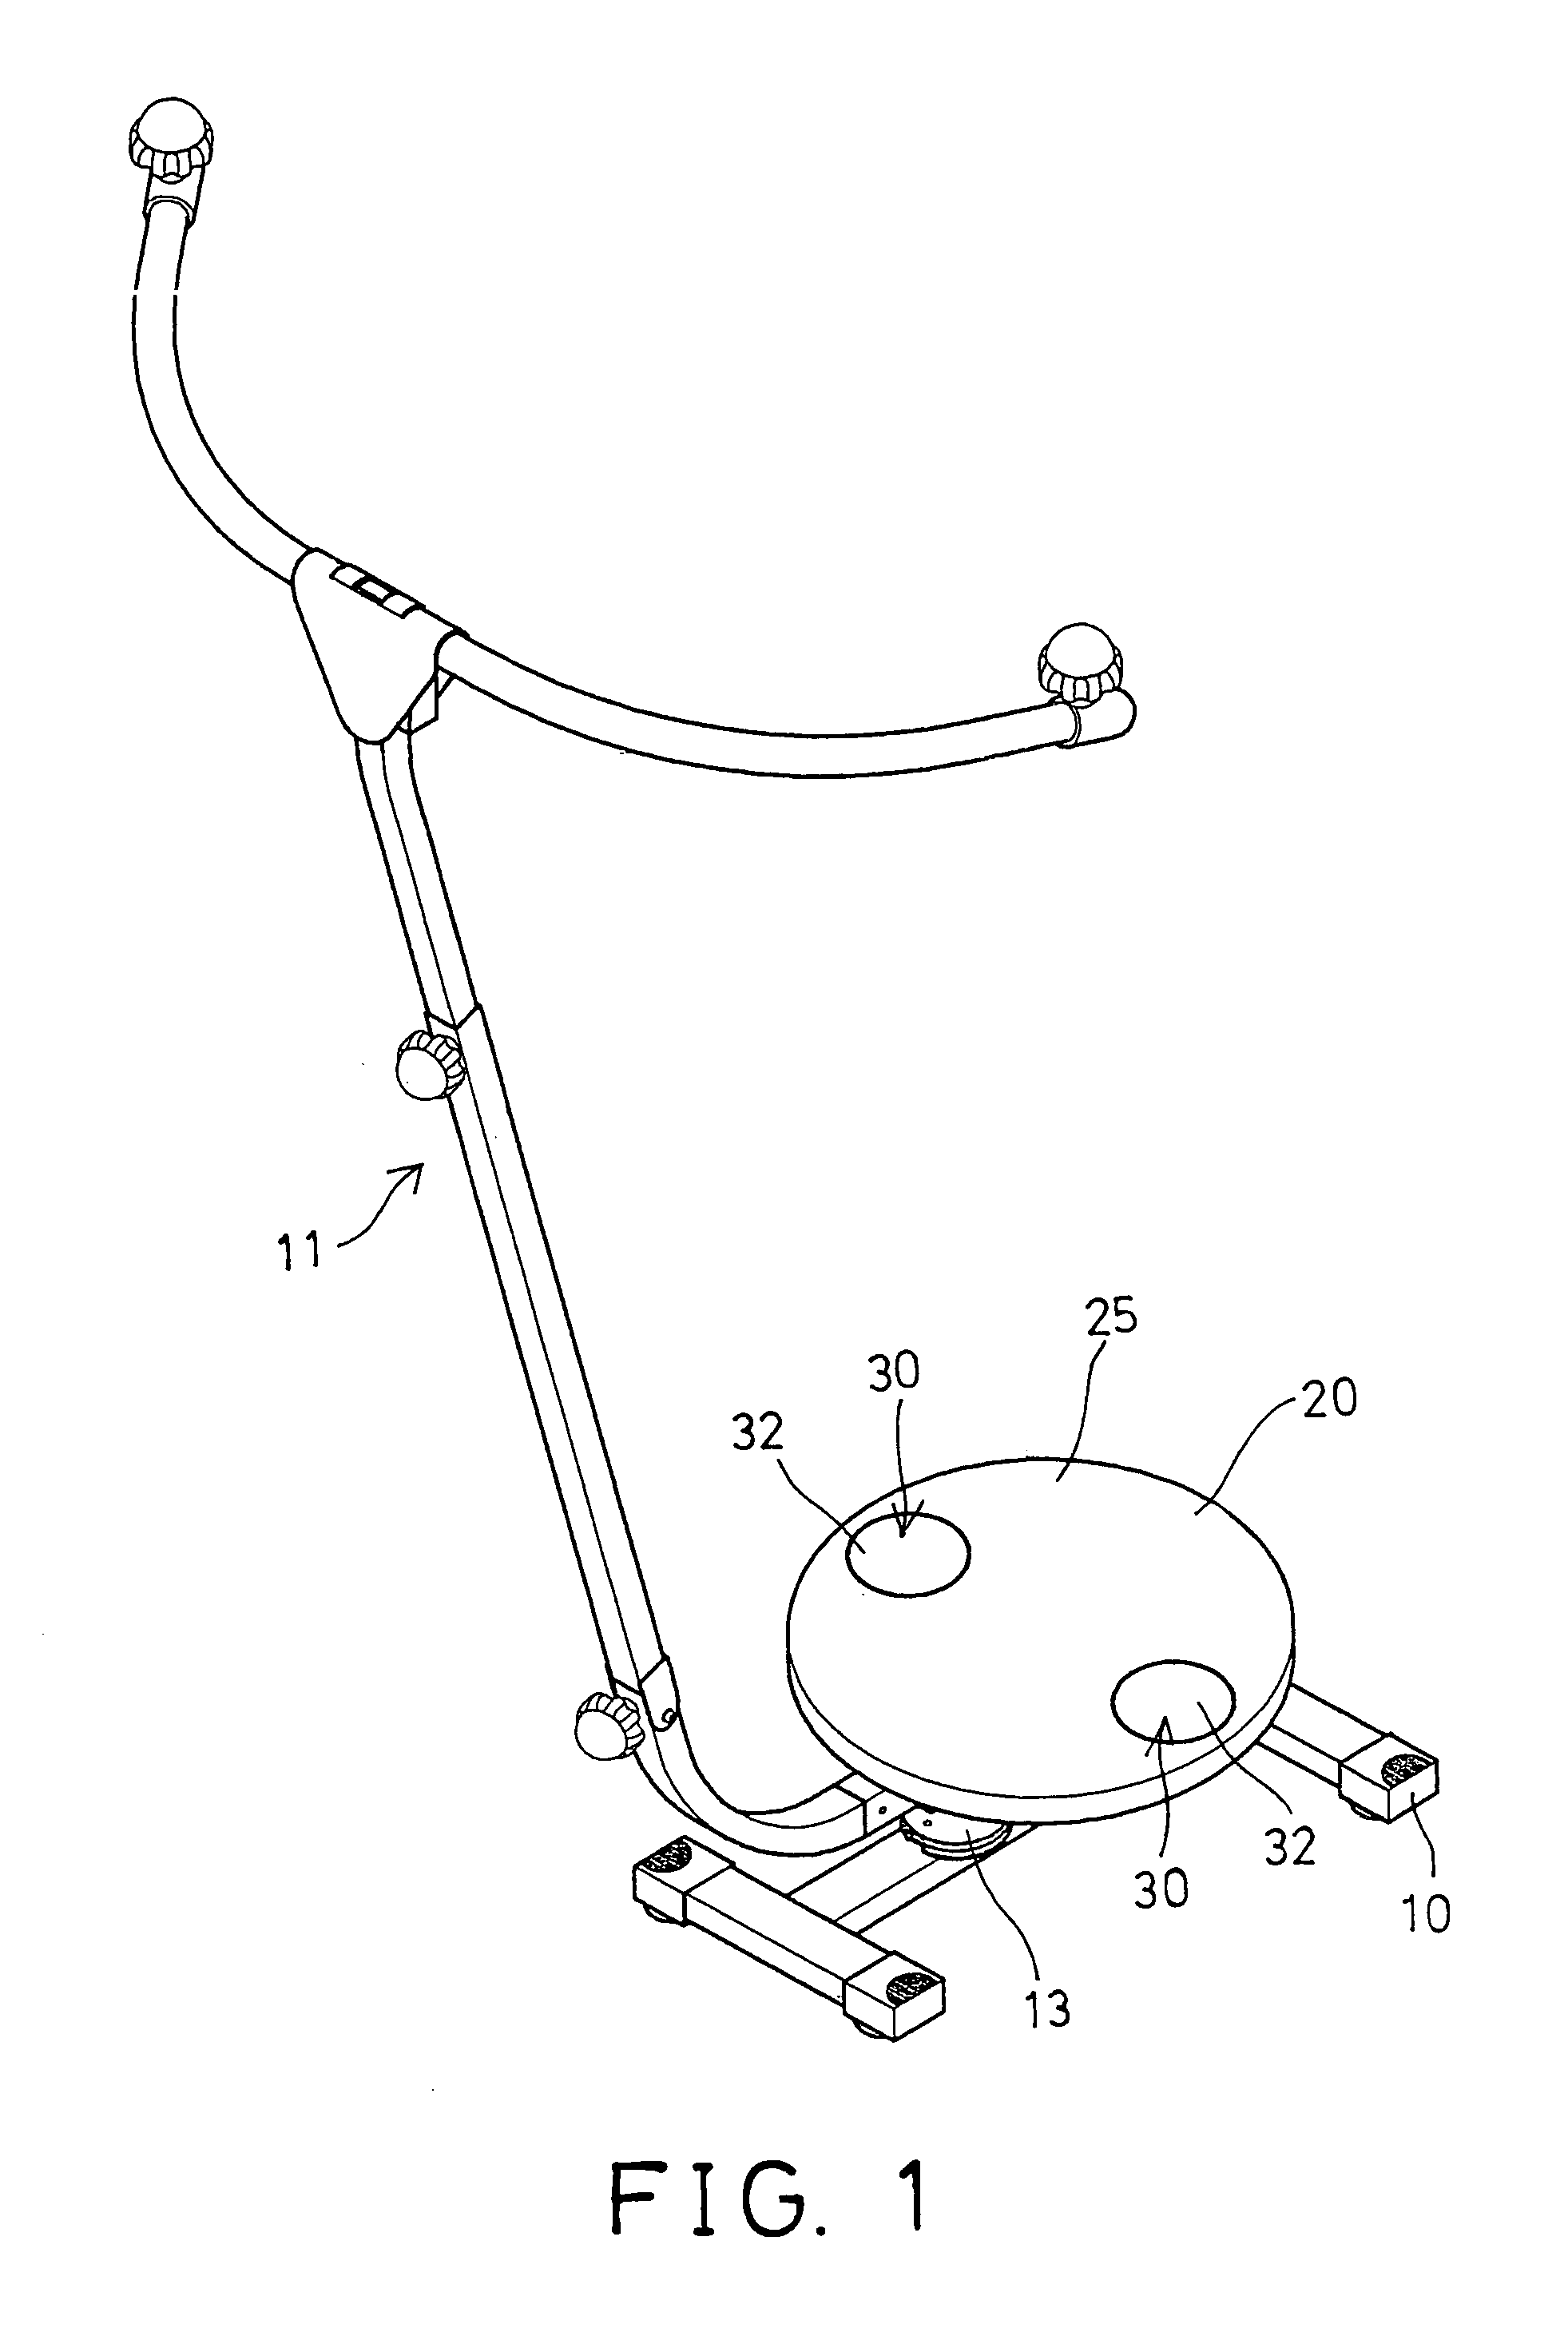 Twist exerciser having pivotal foot supports